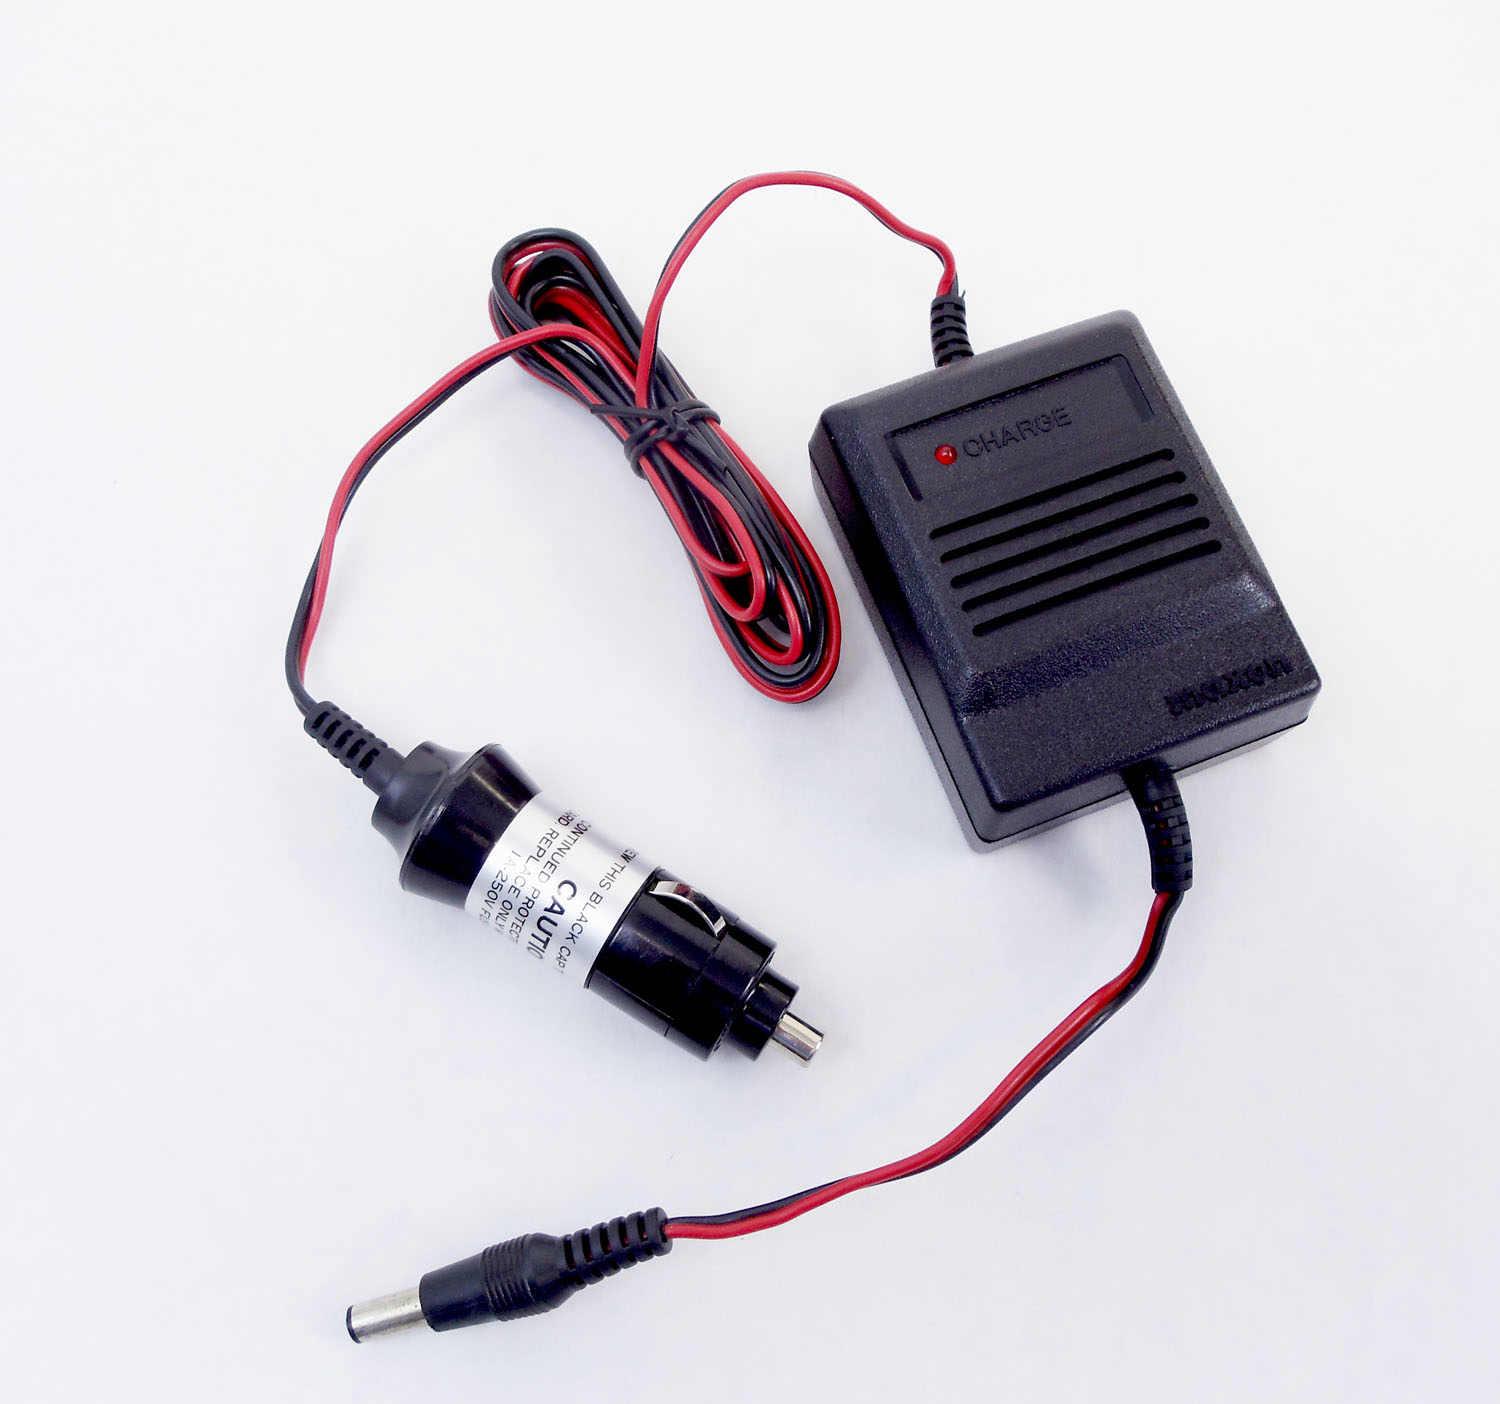 MAXON -  12 VOLT VEHICULAR CHARGER FOR 27LP & OTHER HAND HELD RADIOS. CHARGES NICAD BATTERIES IN UNIT, 2.1 MM PLUG